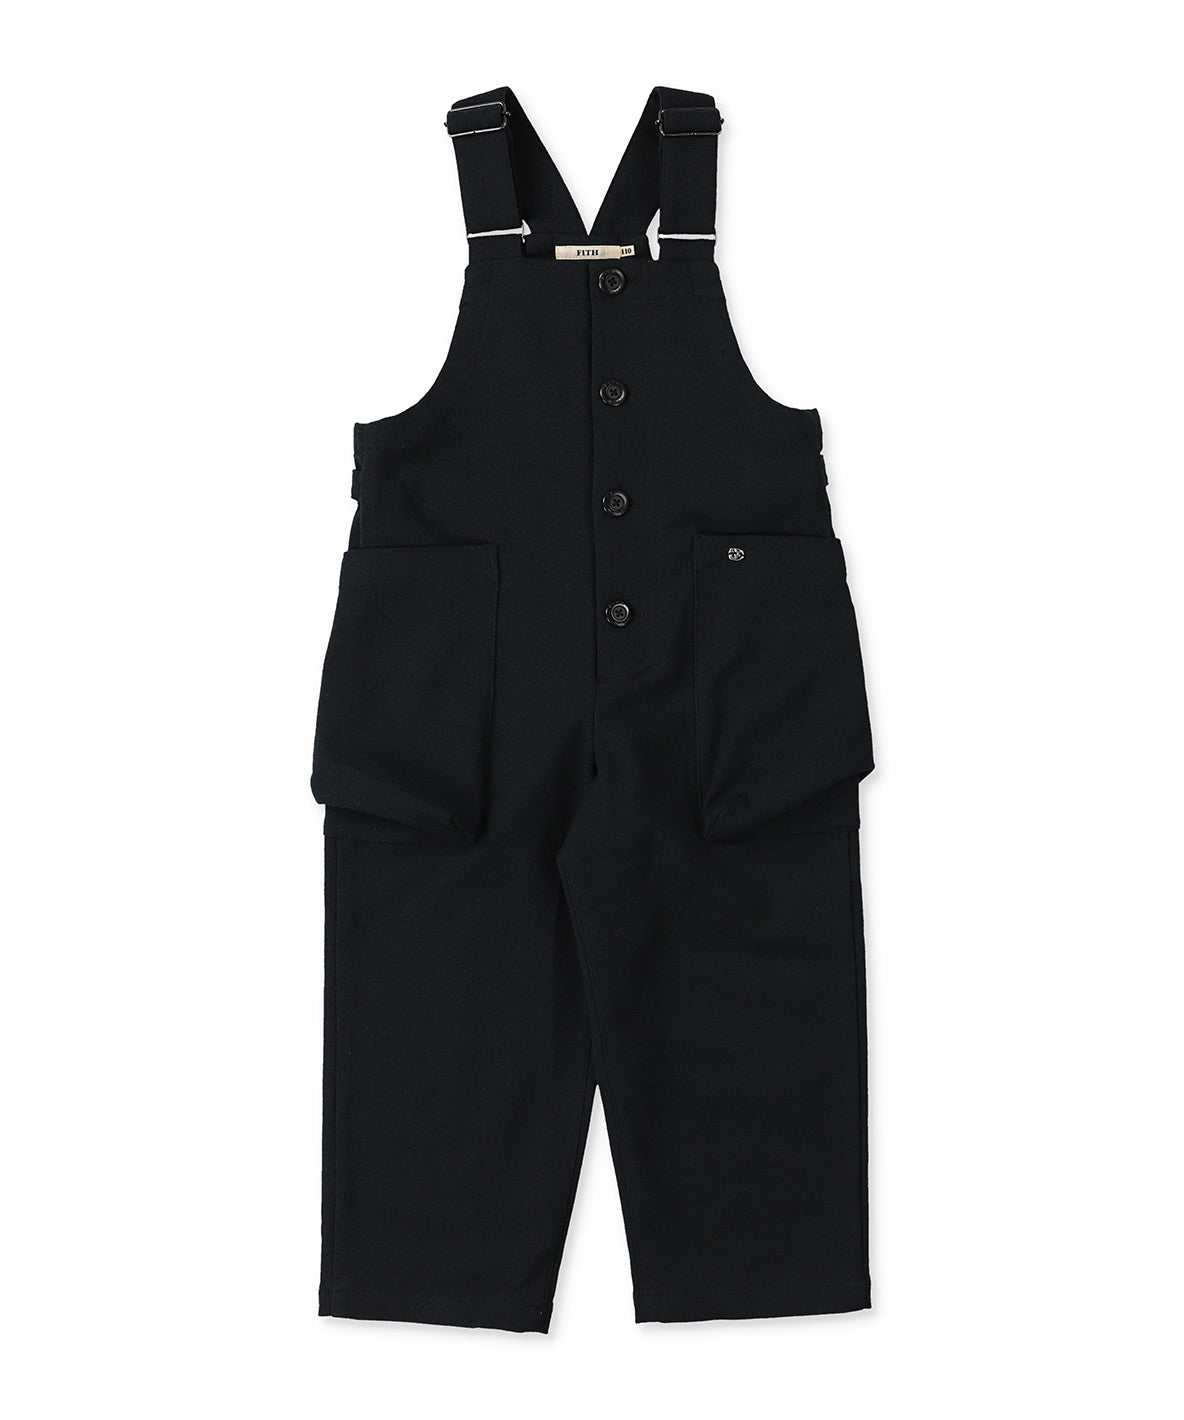 TECHTWEED and SOLOTEX Overalls – FITH ONLINE STORE